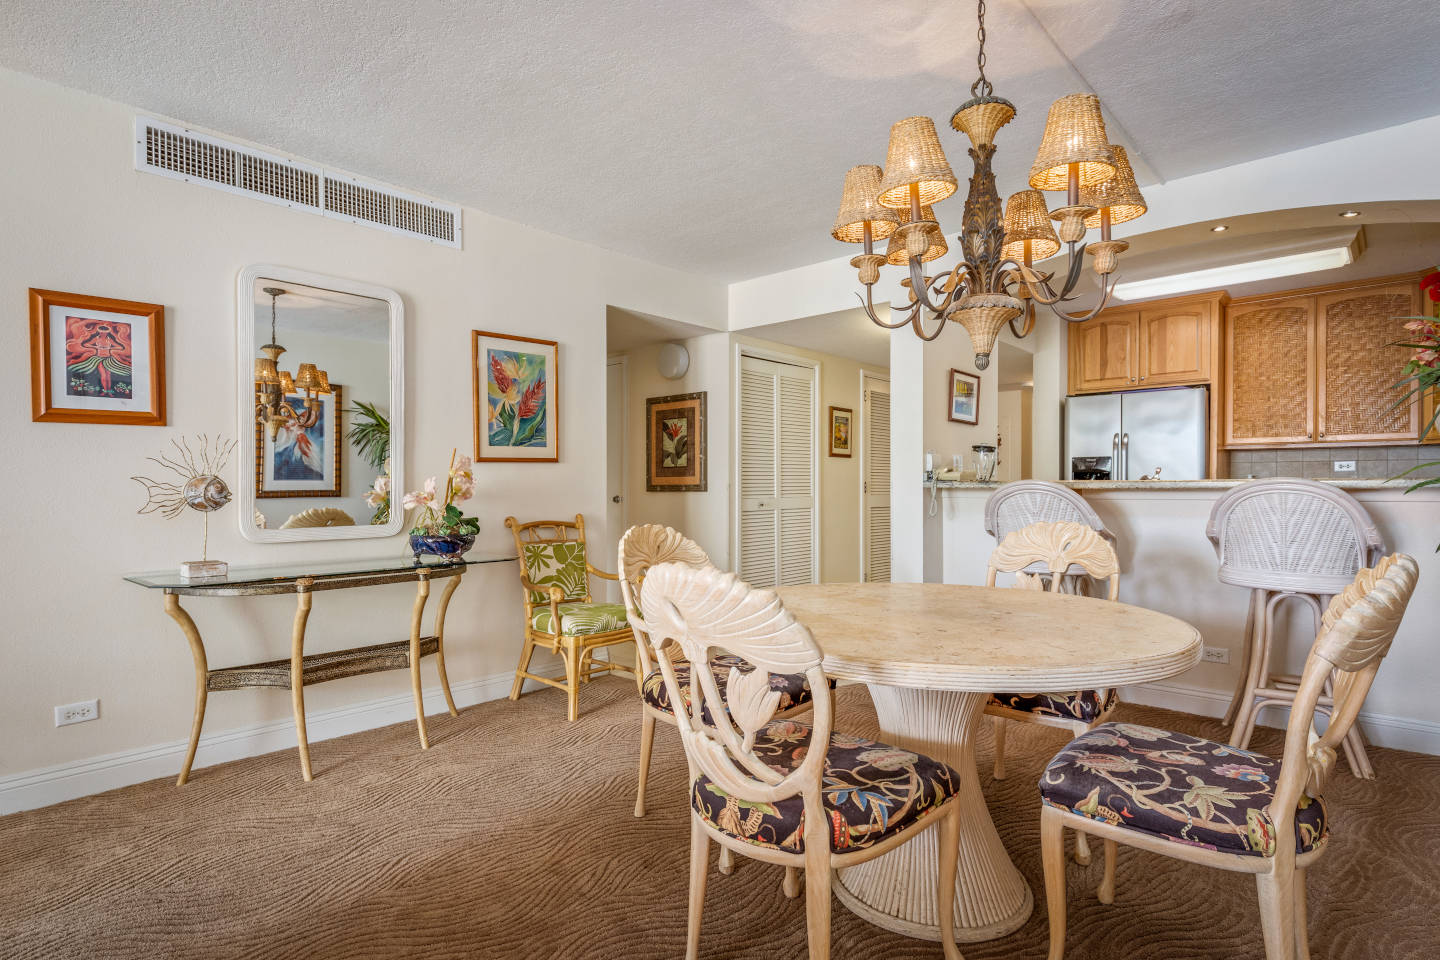 Dining area in the two bedroom ocean view unit with a round dining table and matching floral pattern chairs, mirror and a side table, bar stools facing the kitchen